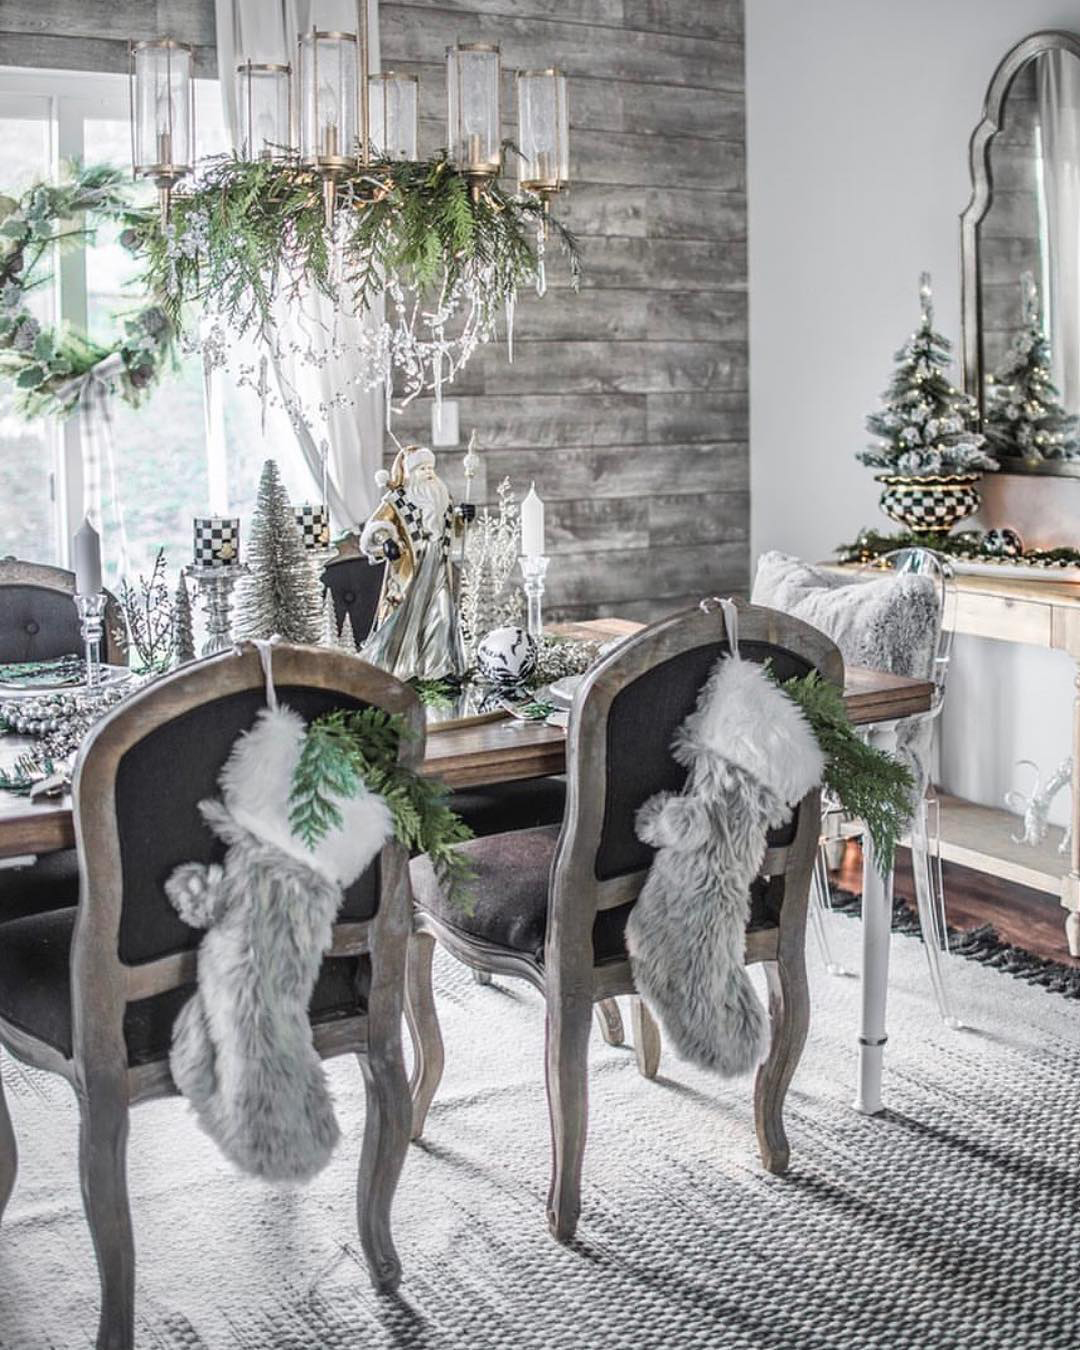 Rustic Christmas Decorating Ideas | House of 5 Blog